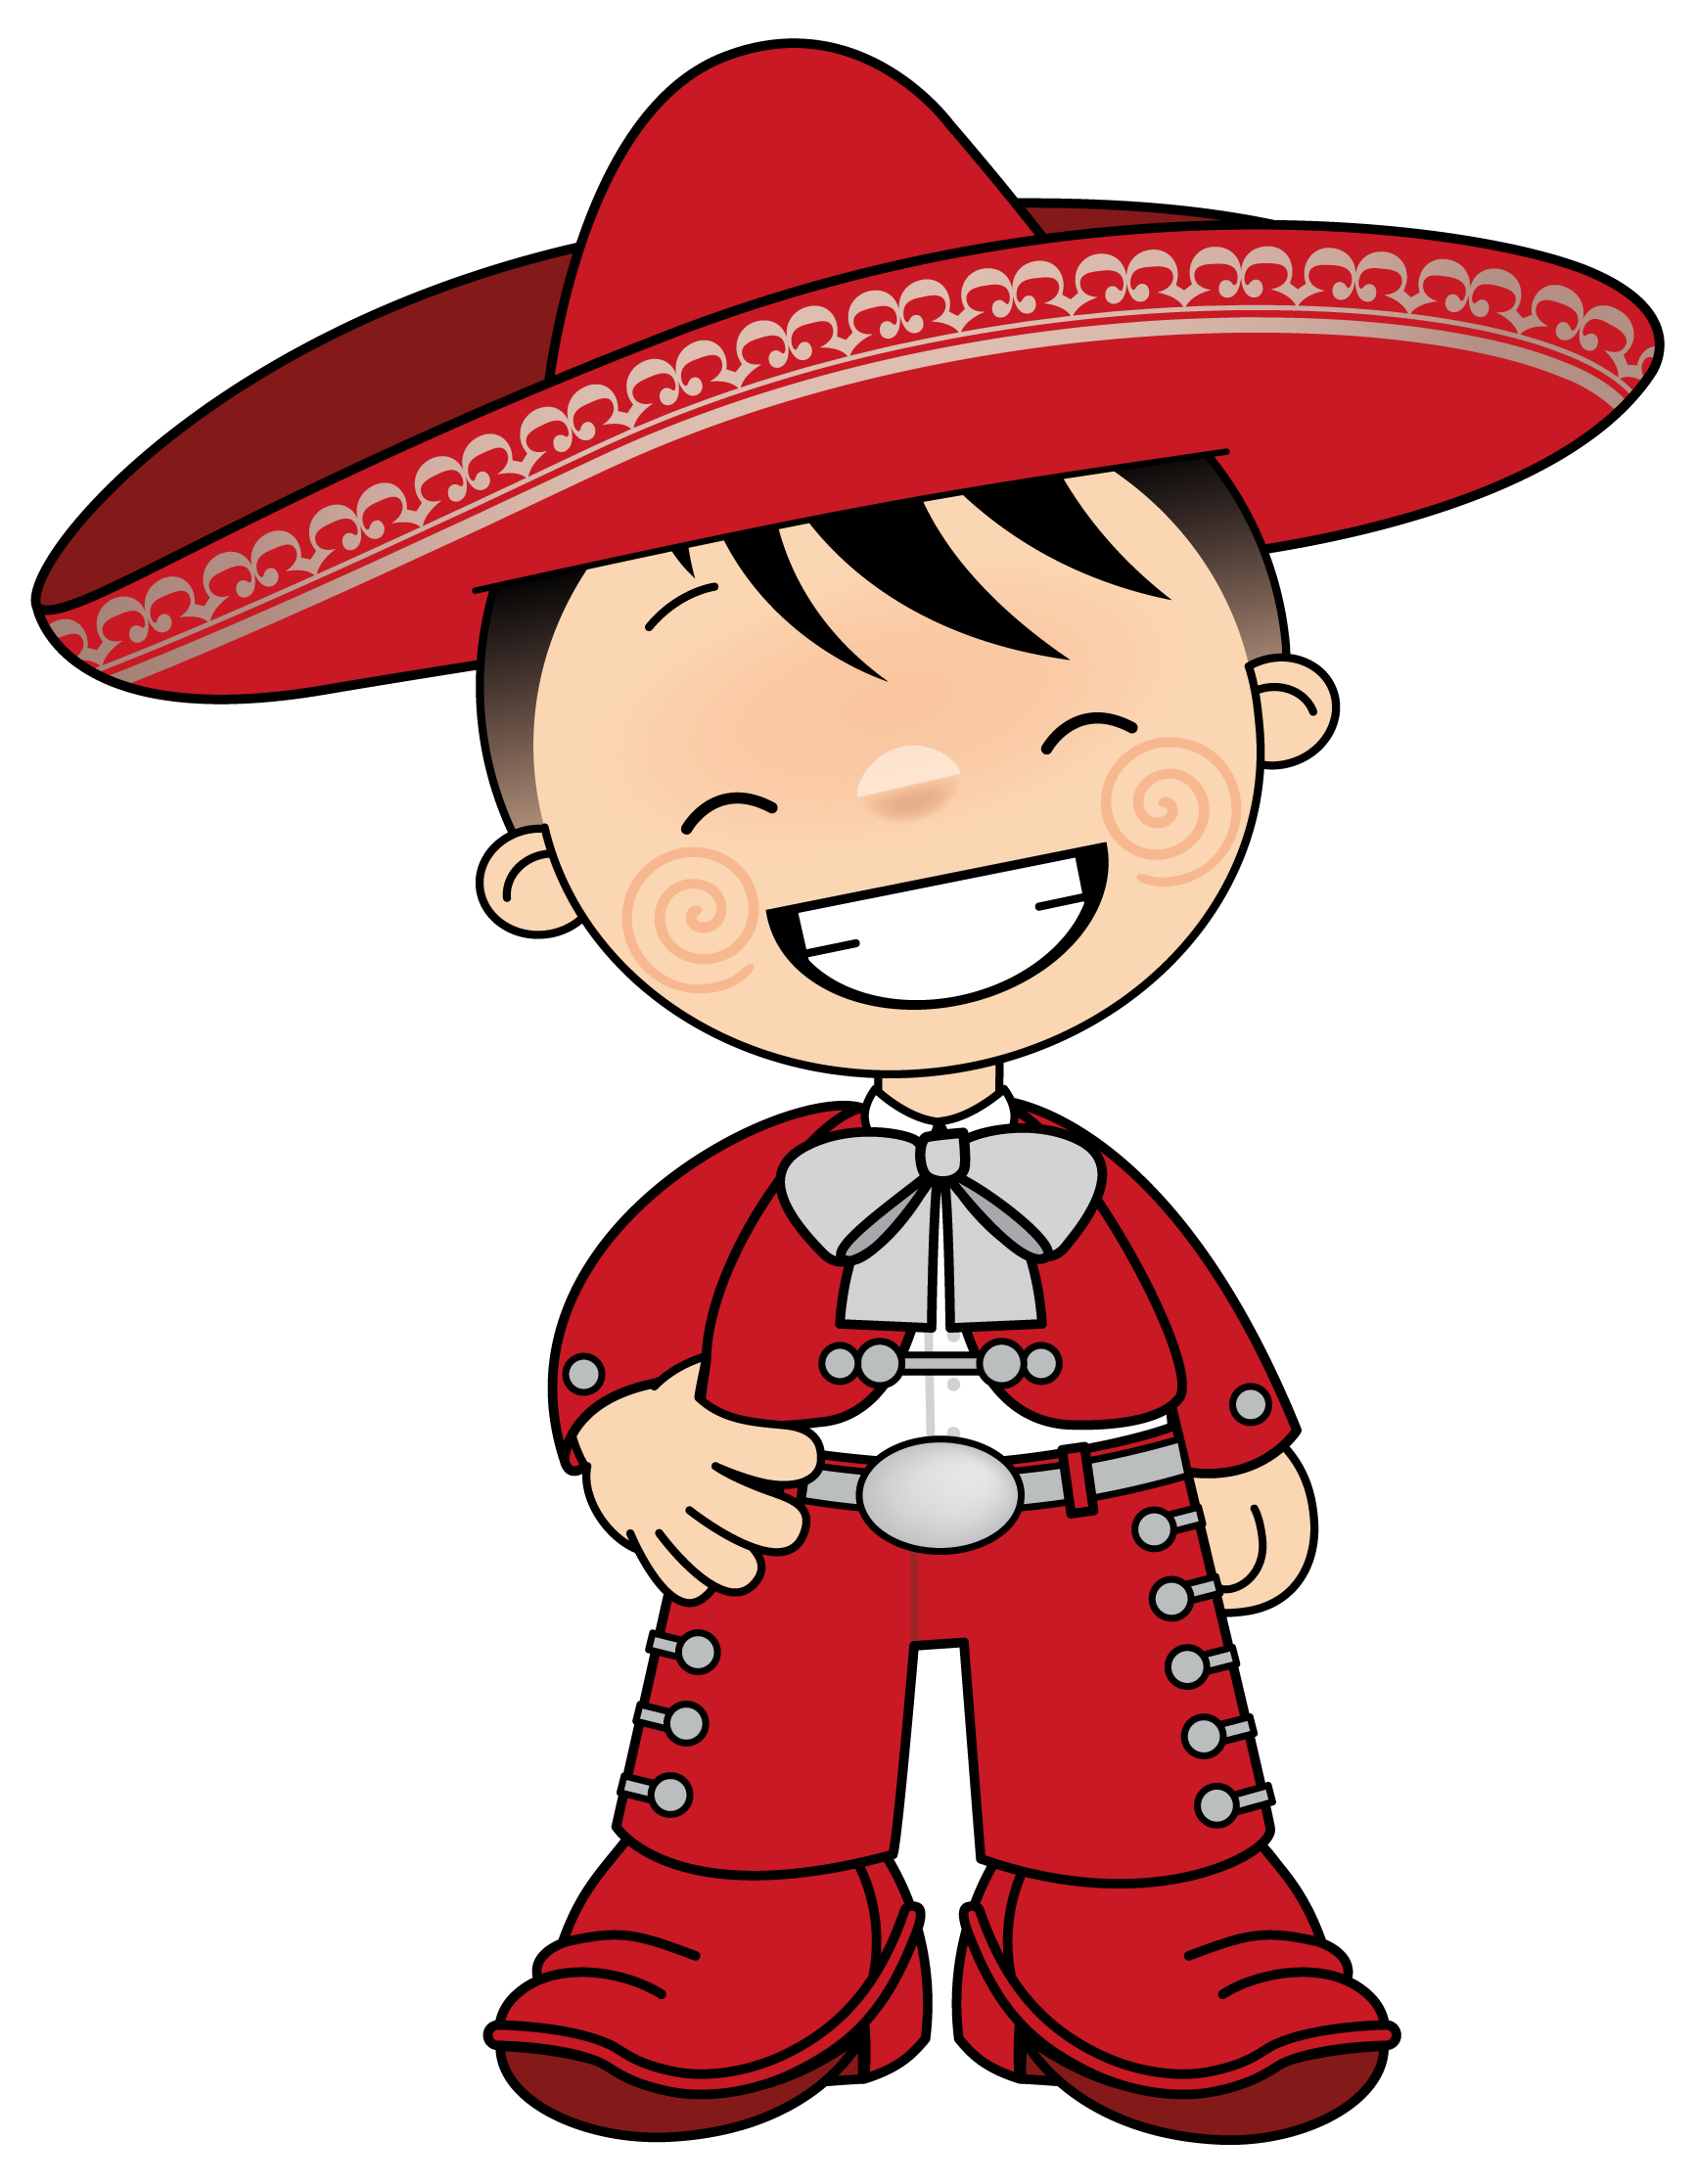 Charro clipart clipart images gallery for free download.